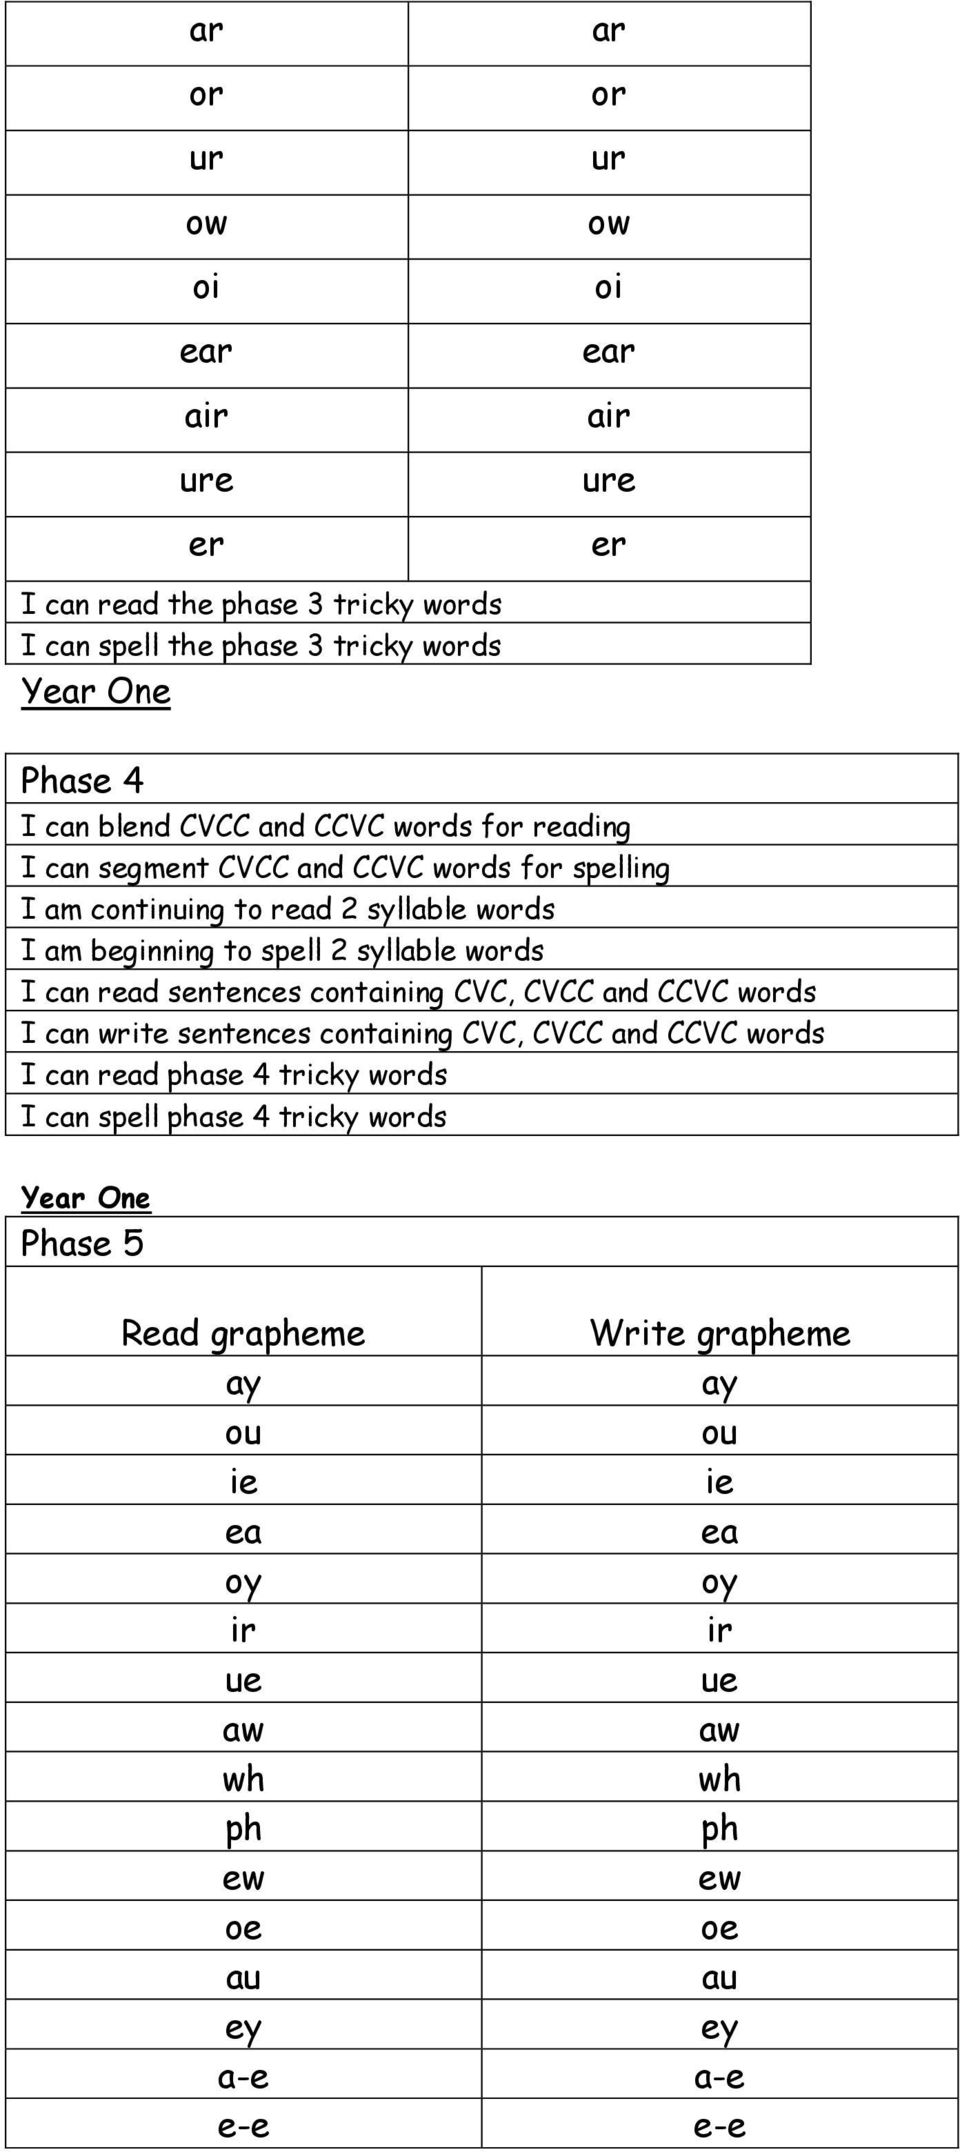 I can read sentences containing CVC, CVCC and CCVC words I can write sentences containing CVC, CVCC and CCVC words I can read phase 4 tricky words I can spell